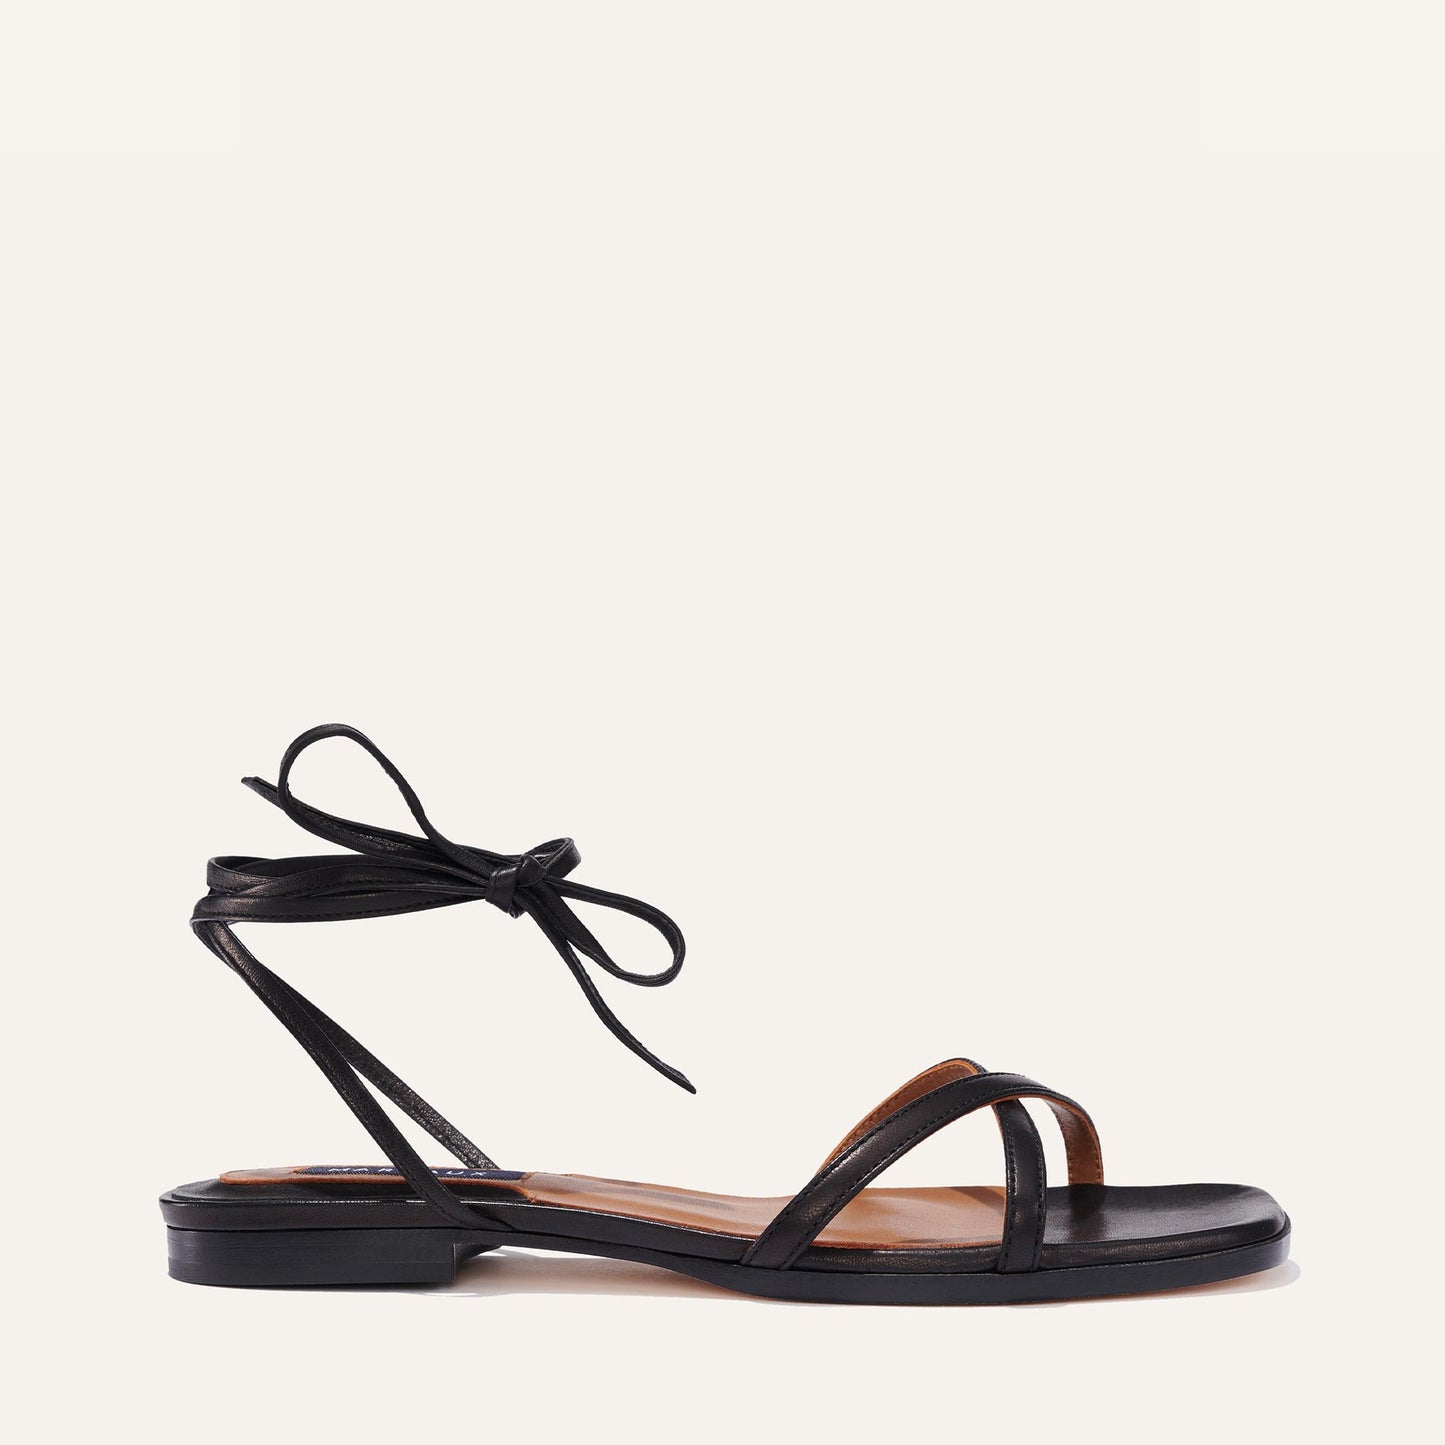 Margaux's classic strappy Wrap Sandal with ankle ties, made in Spain from soft, black Italian nappa leather